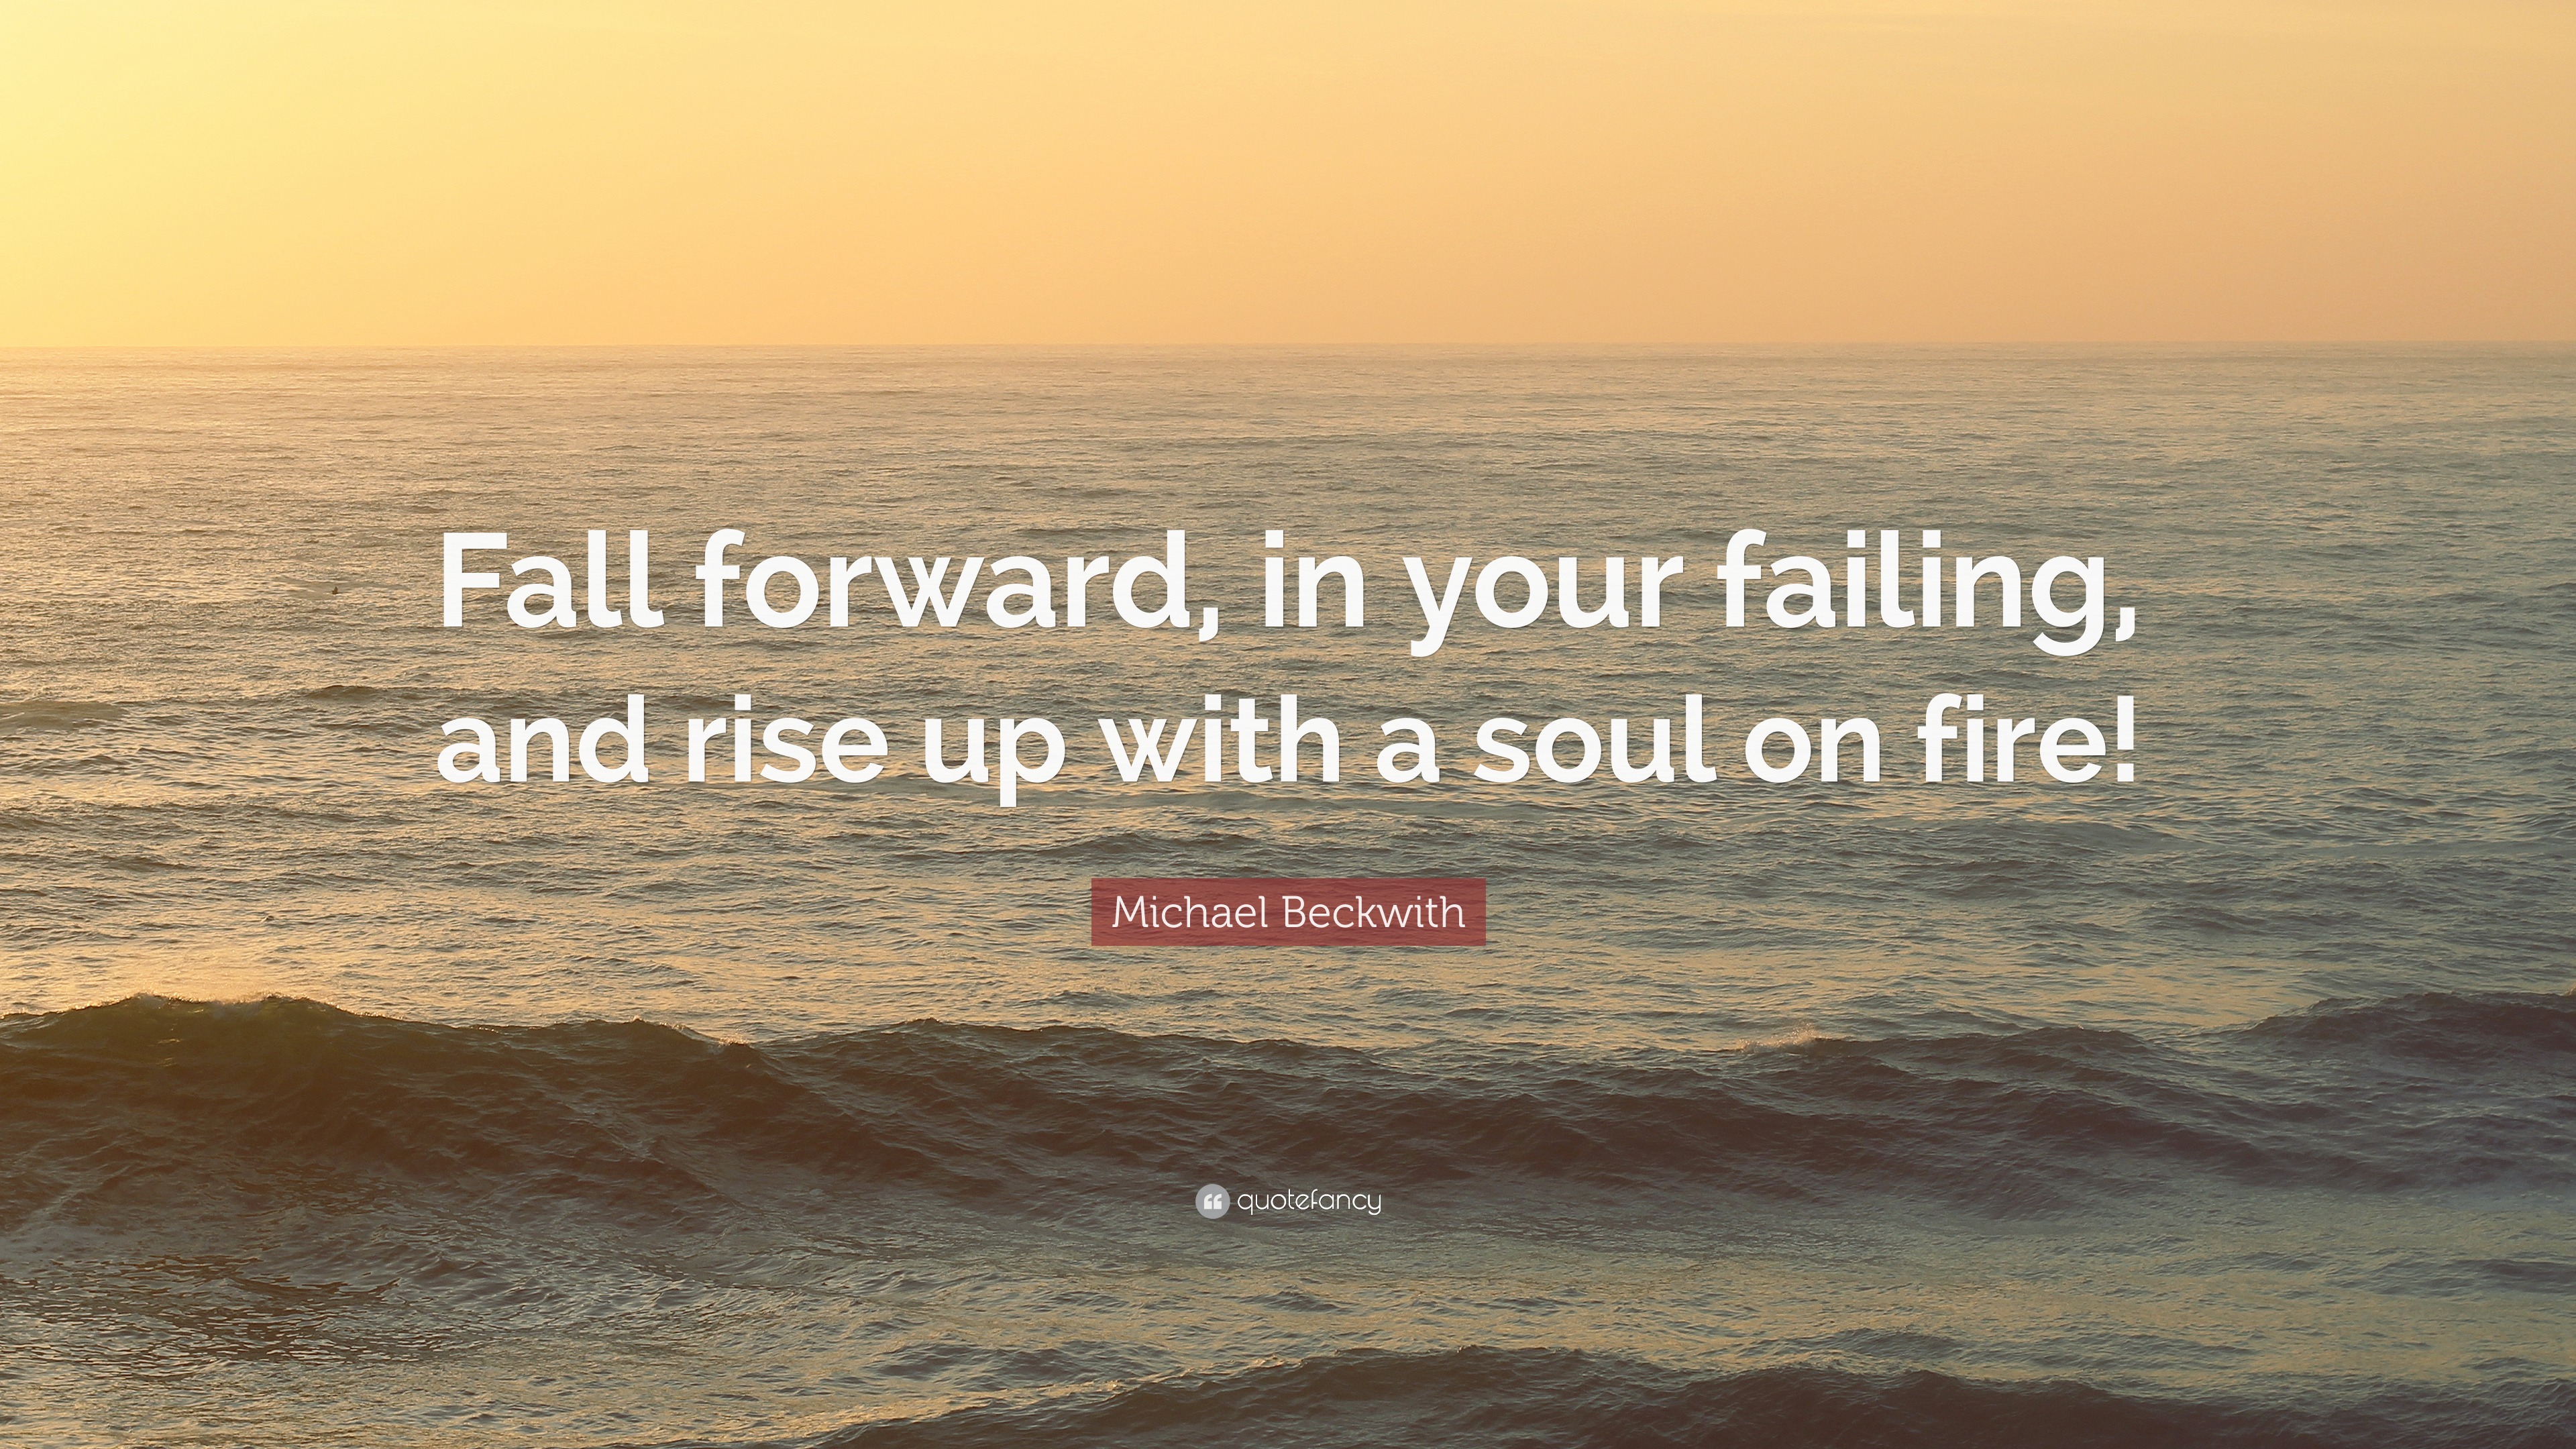 Michael Beckwith Quote Fall Forward In Your Failing And Rise Up With A Soul On Fire